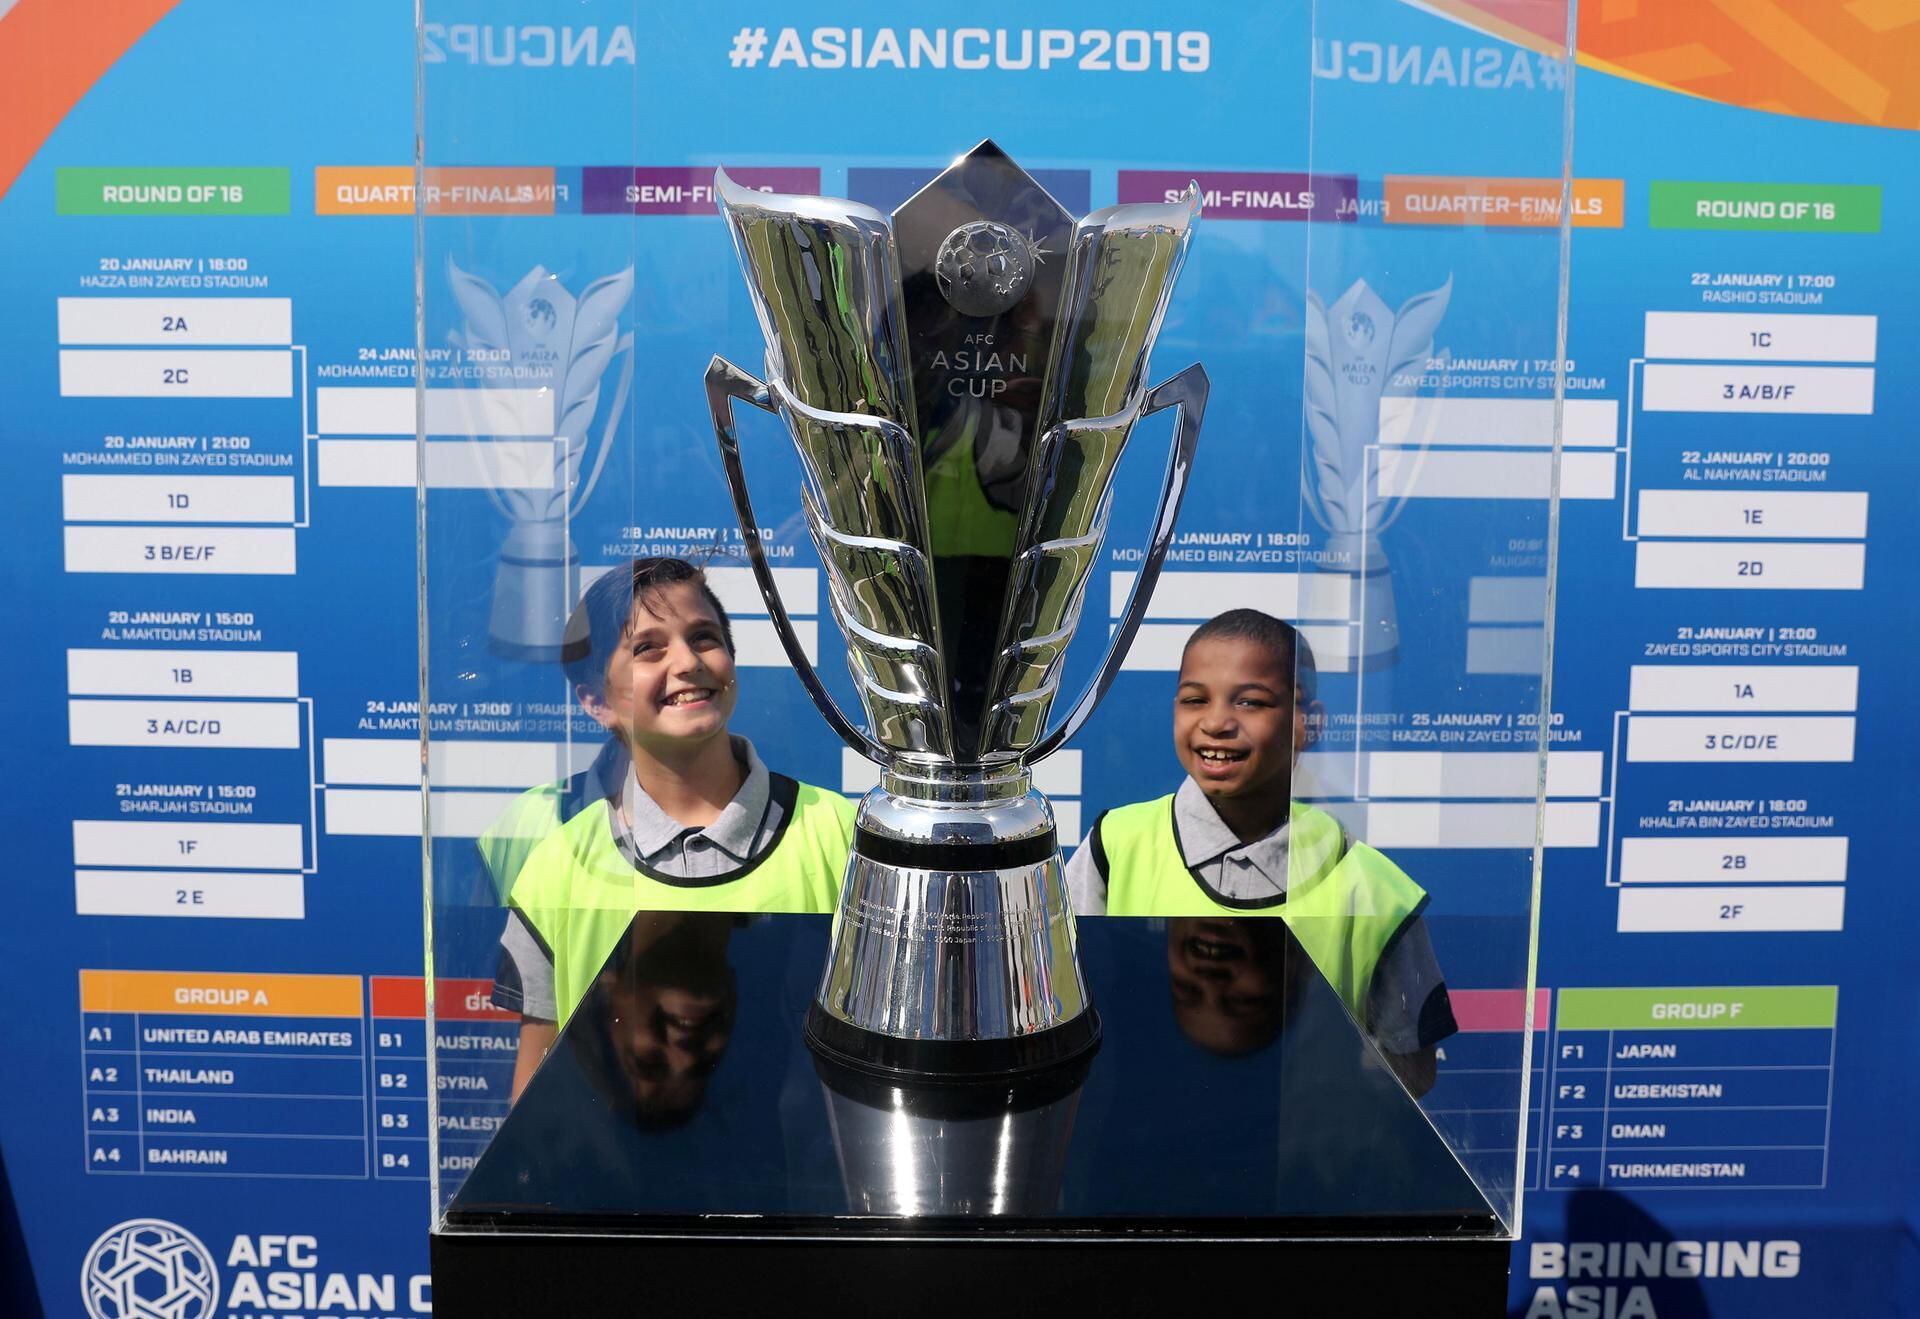 2019 Asian Cup: Groups, tickets, latest news and all you need to know